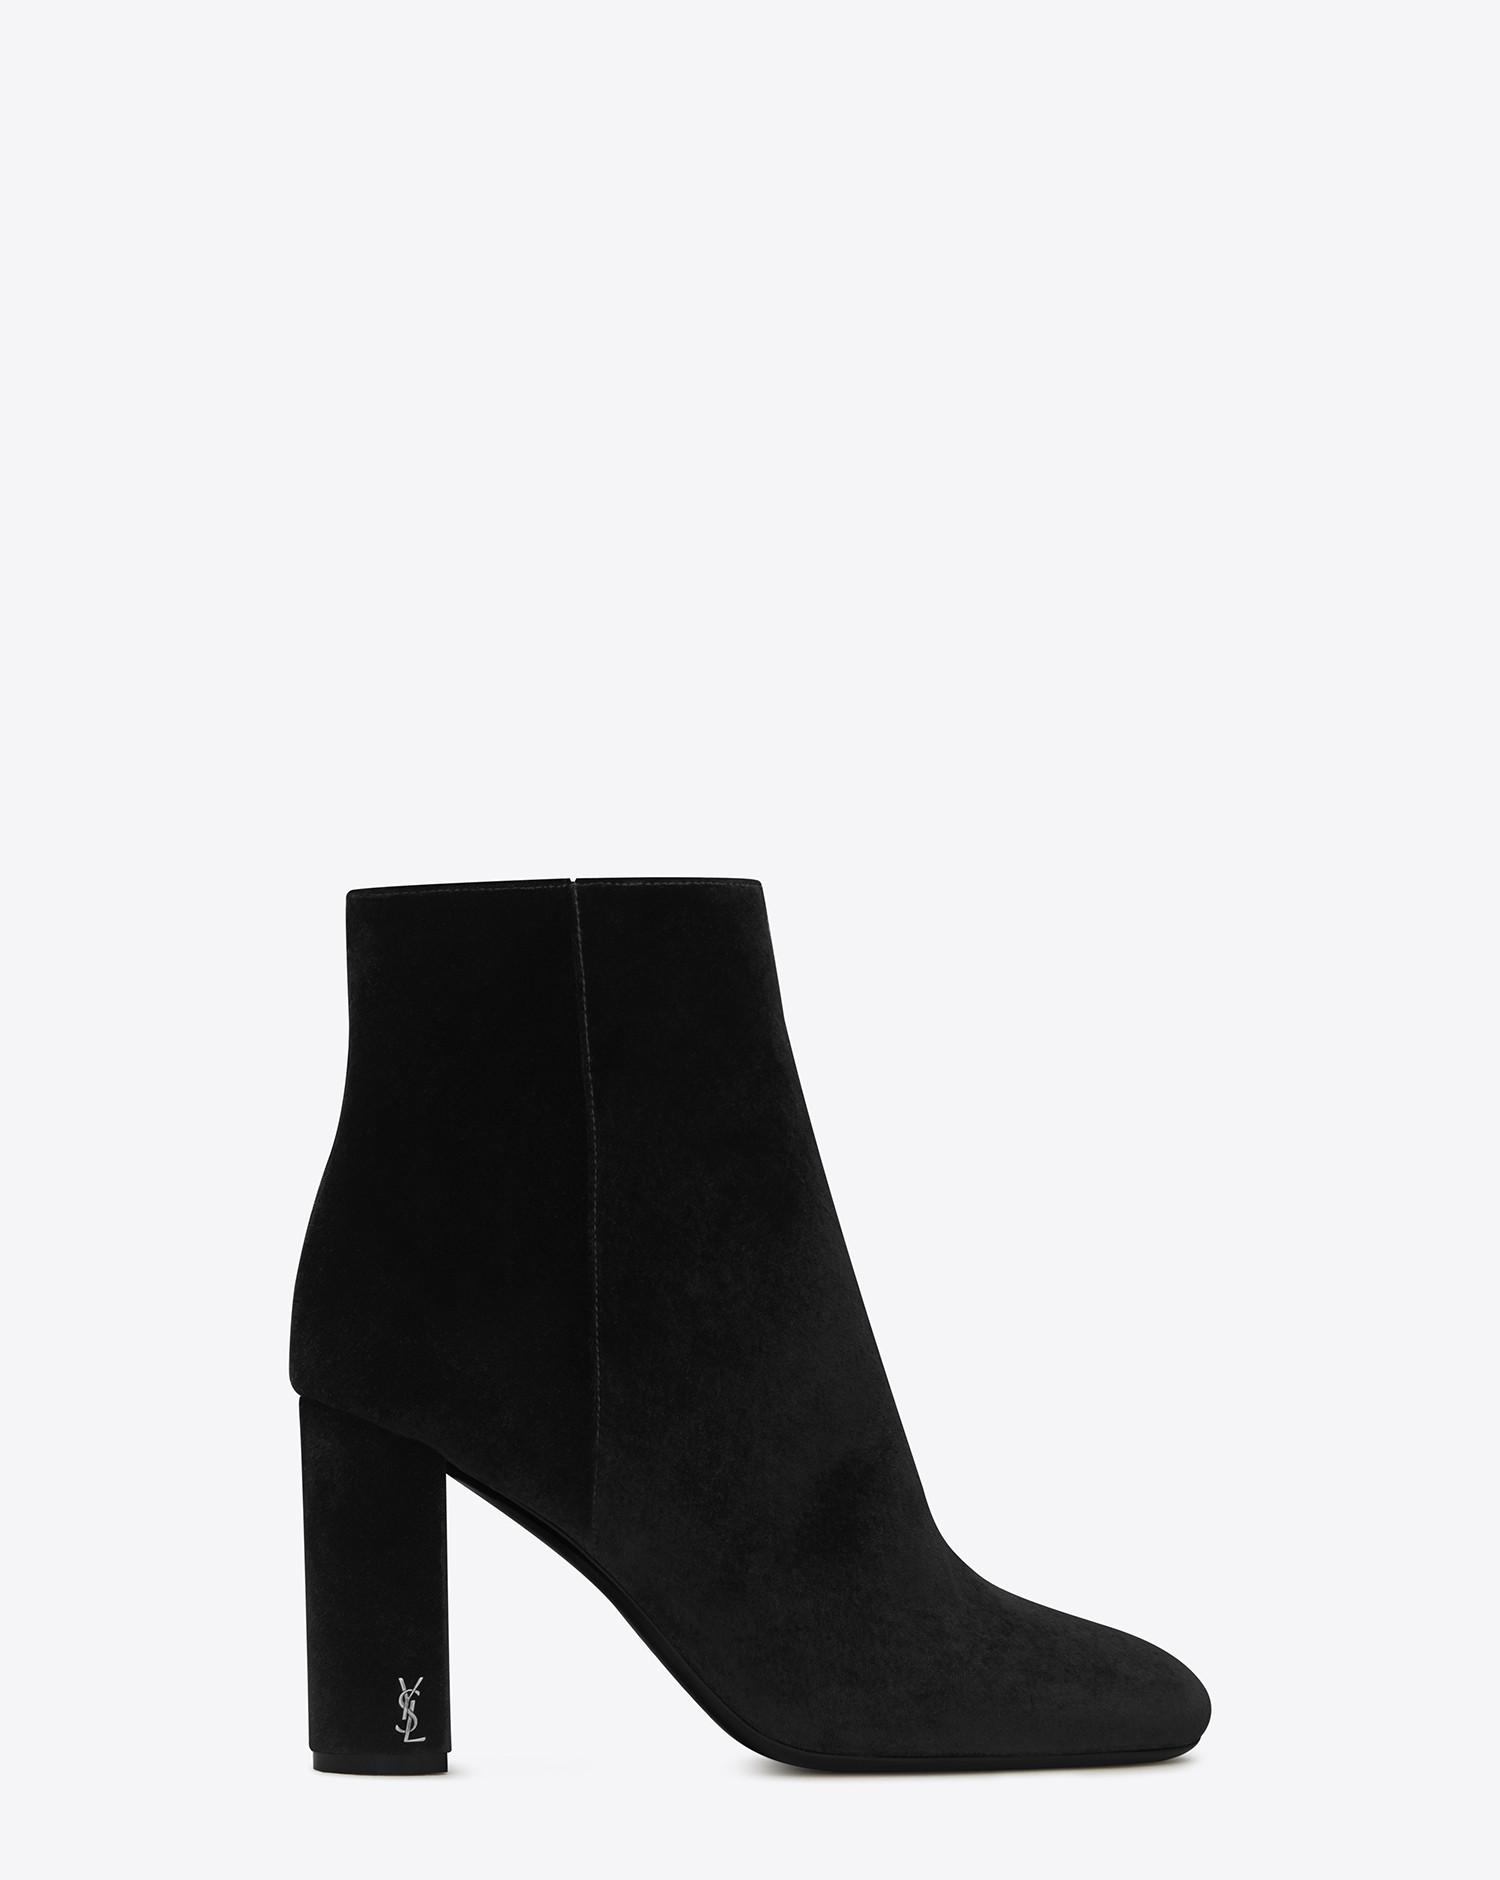 Saint Laurent Leather Loulou 95 Ankle Boots in Black - Lyst